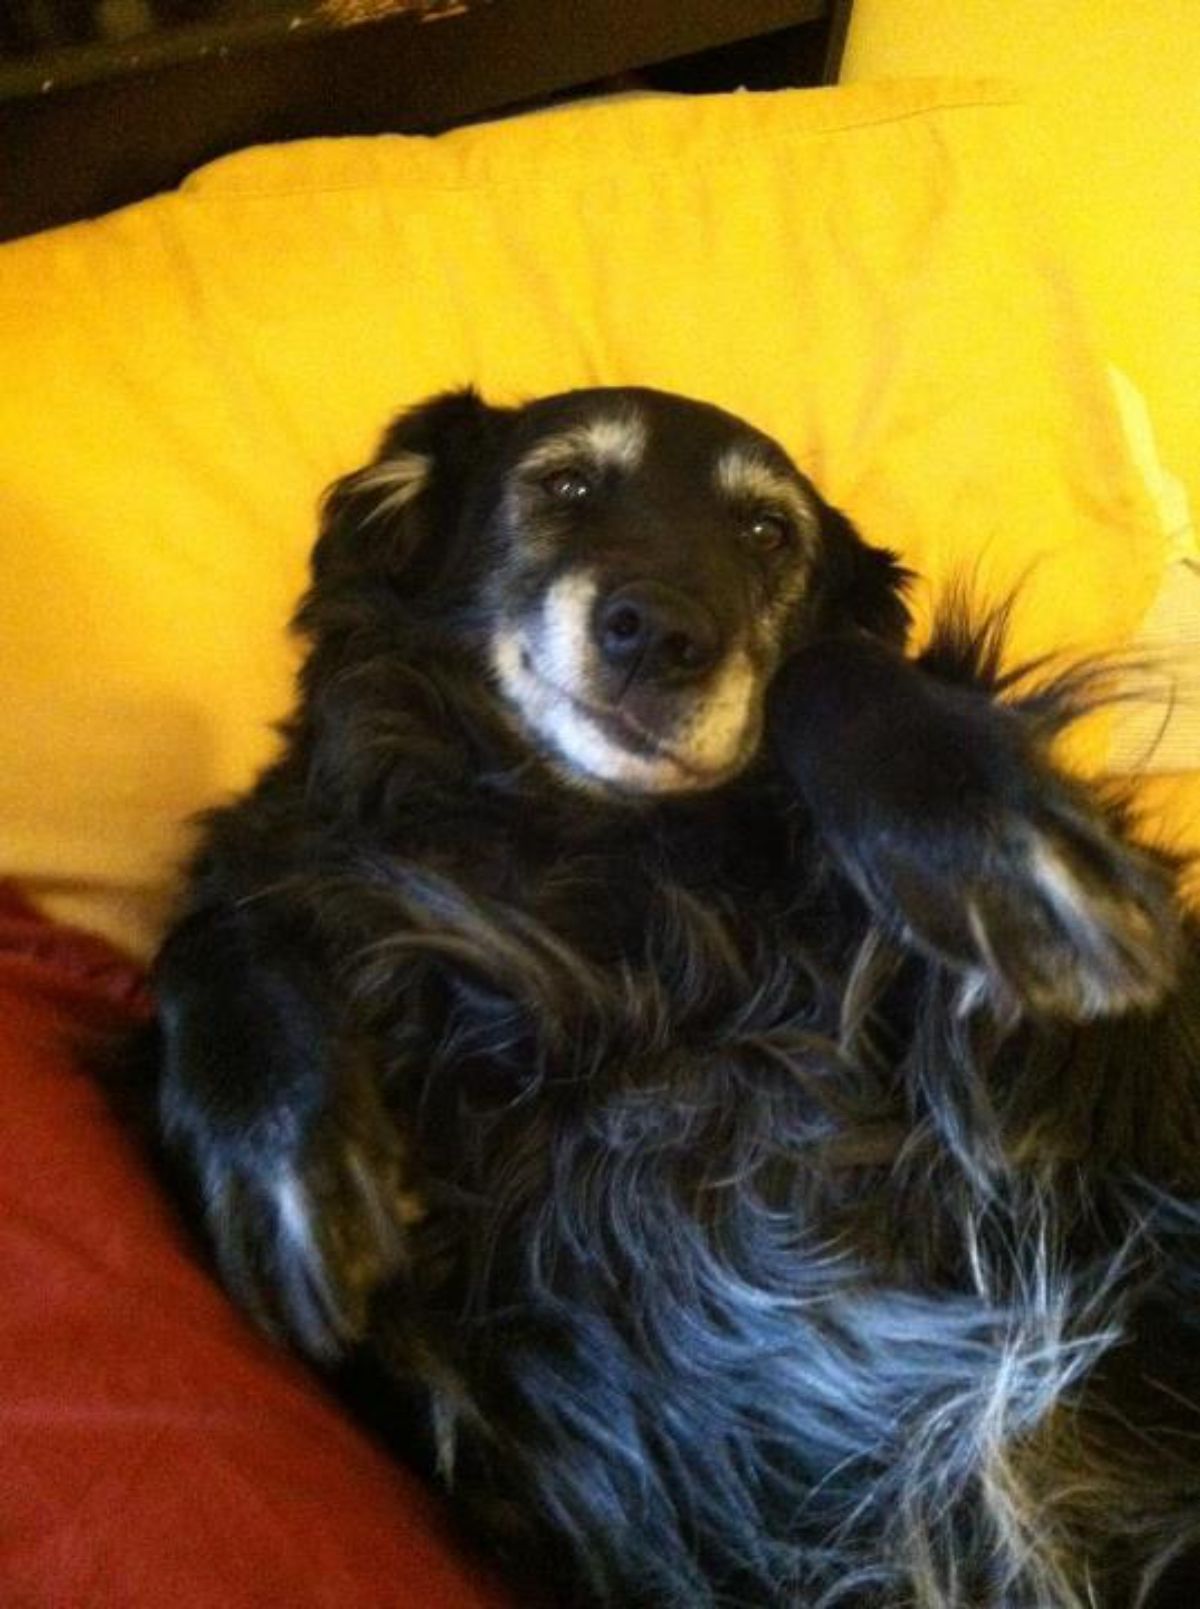 old black and white fluffy dog laying belly up with a yellow pillow behind and the dog has a lopsided smile